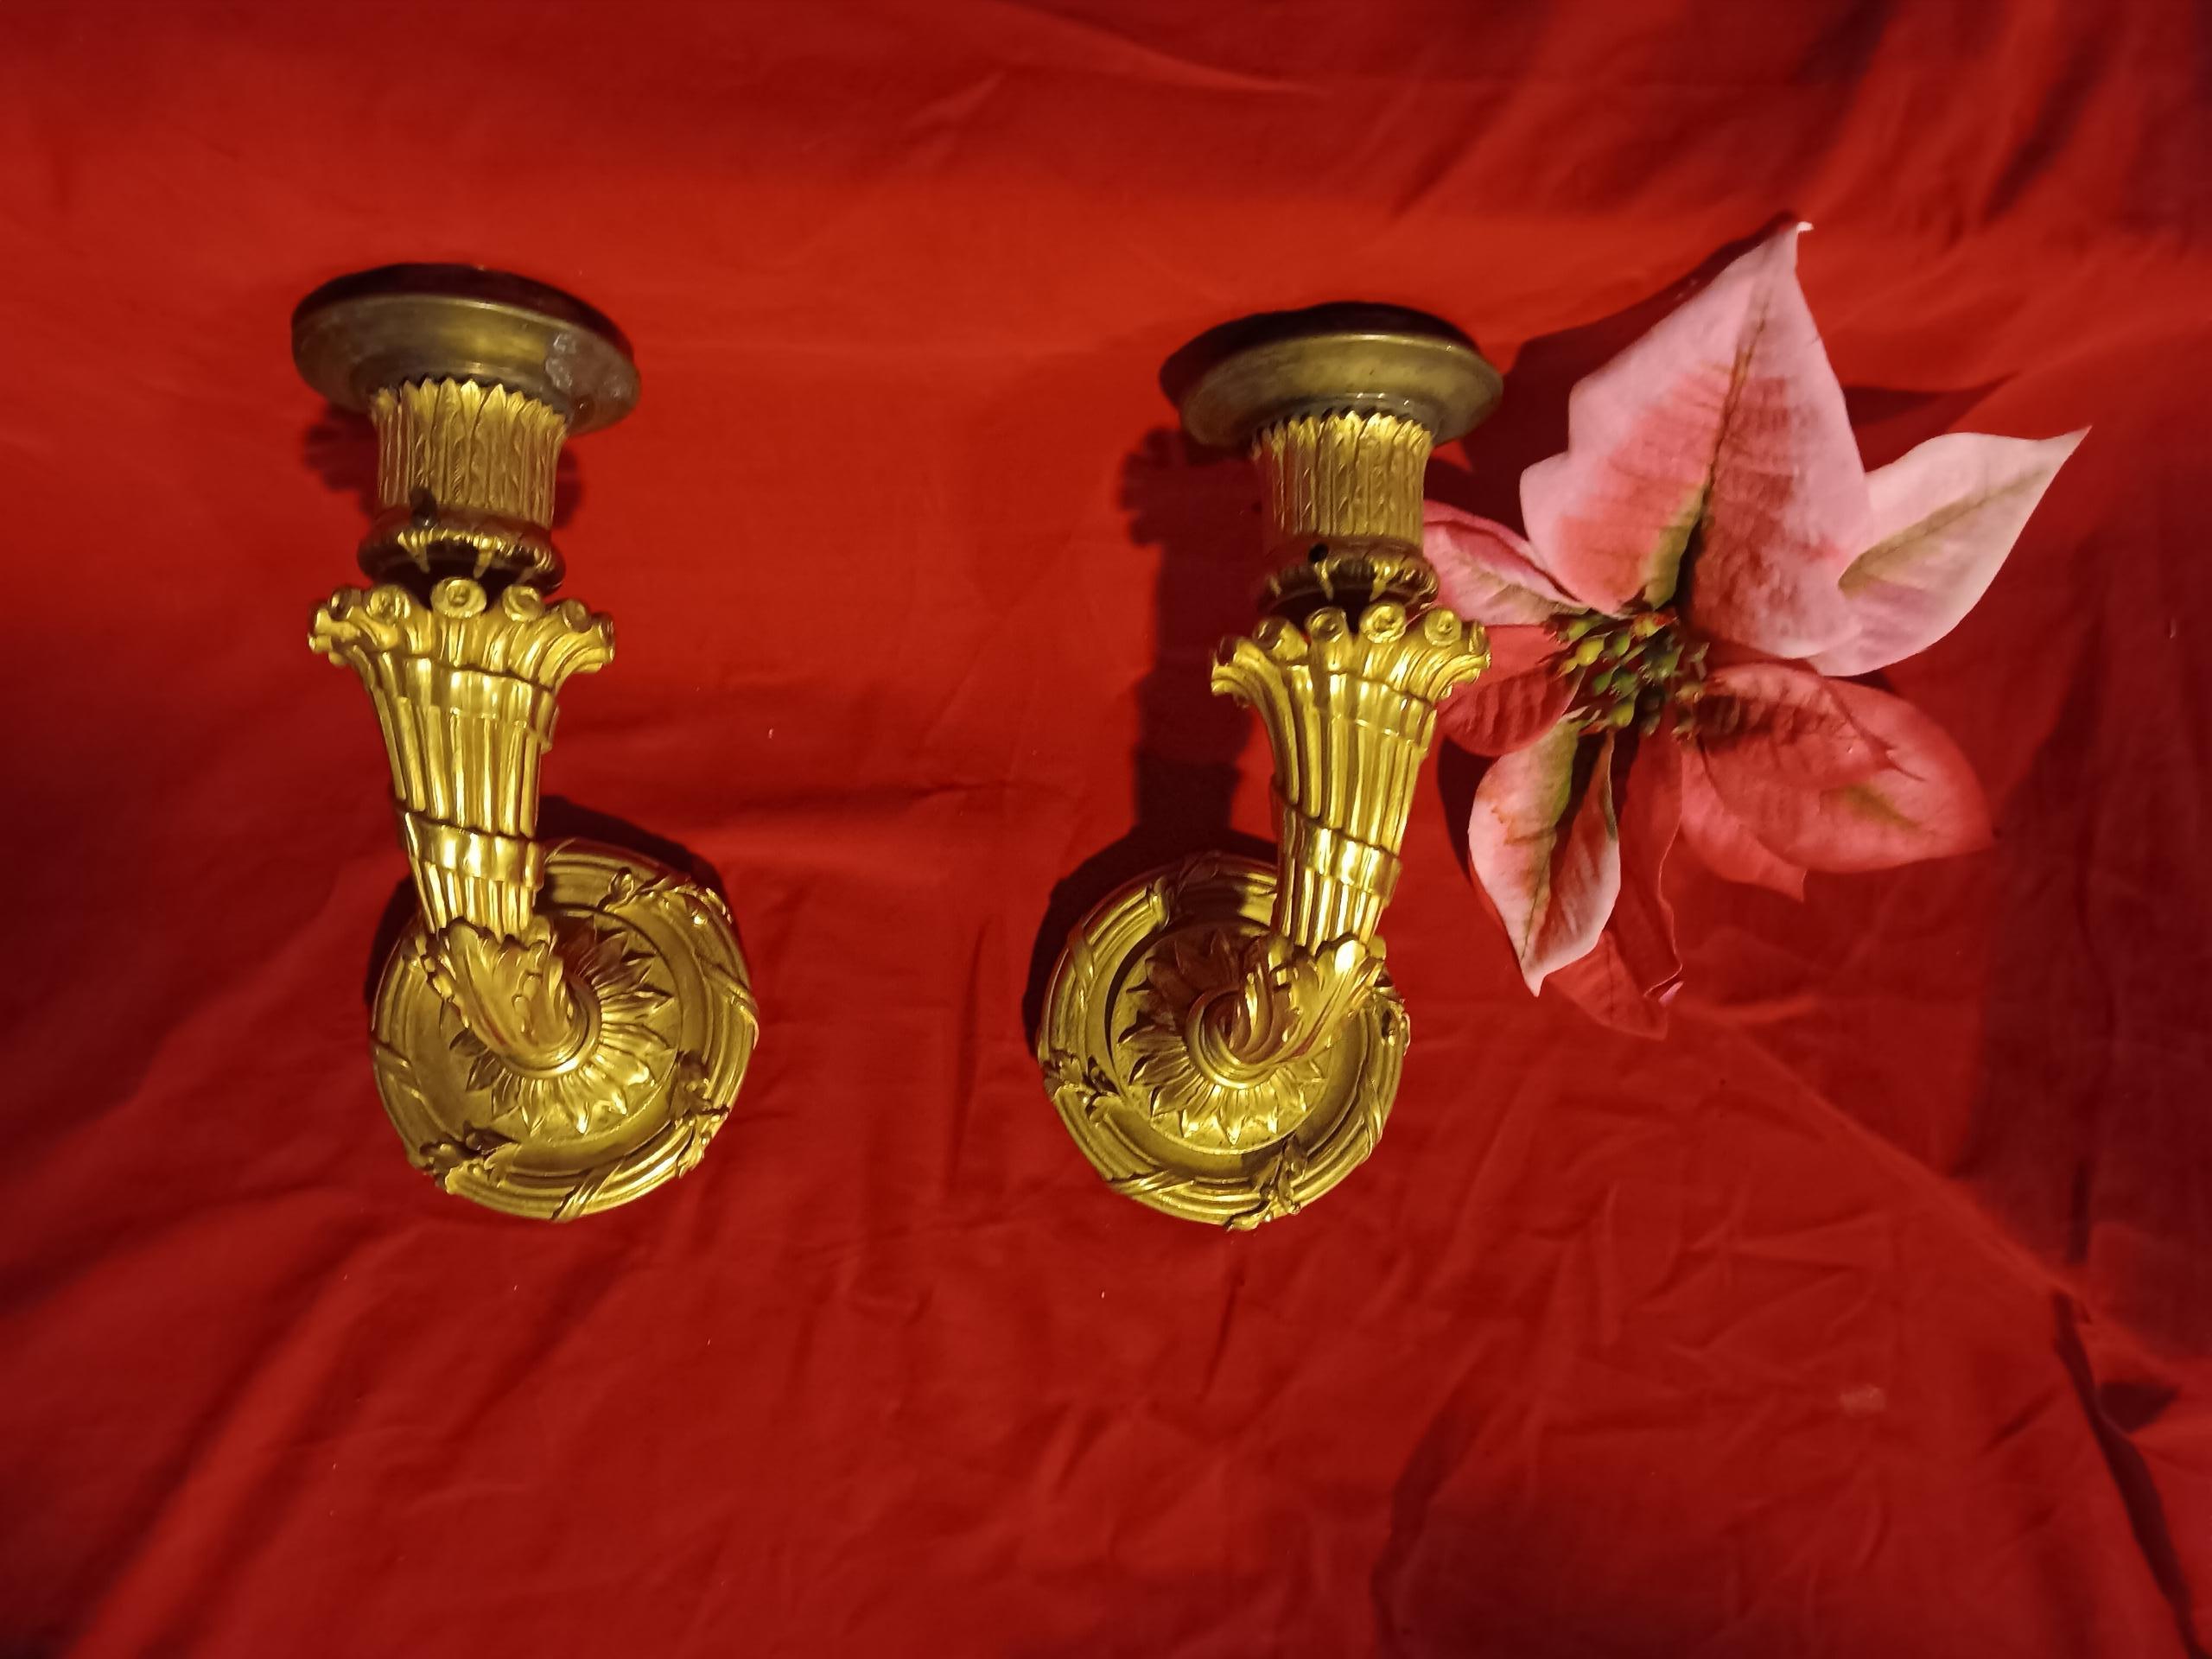 Stunning and Rare Pair Antique c1890's Fire Gilt Bronze Wall Sconces Signed by E.F. Caldwell. Please look closely at pictures as these sconces are beautiful beyond words. Originally gas fixtures they have been wired for electric and are ready to